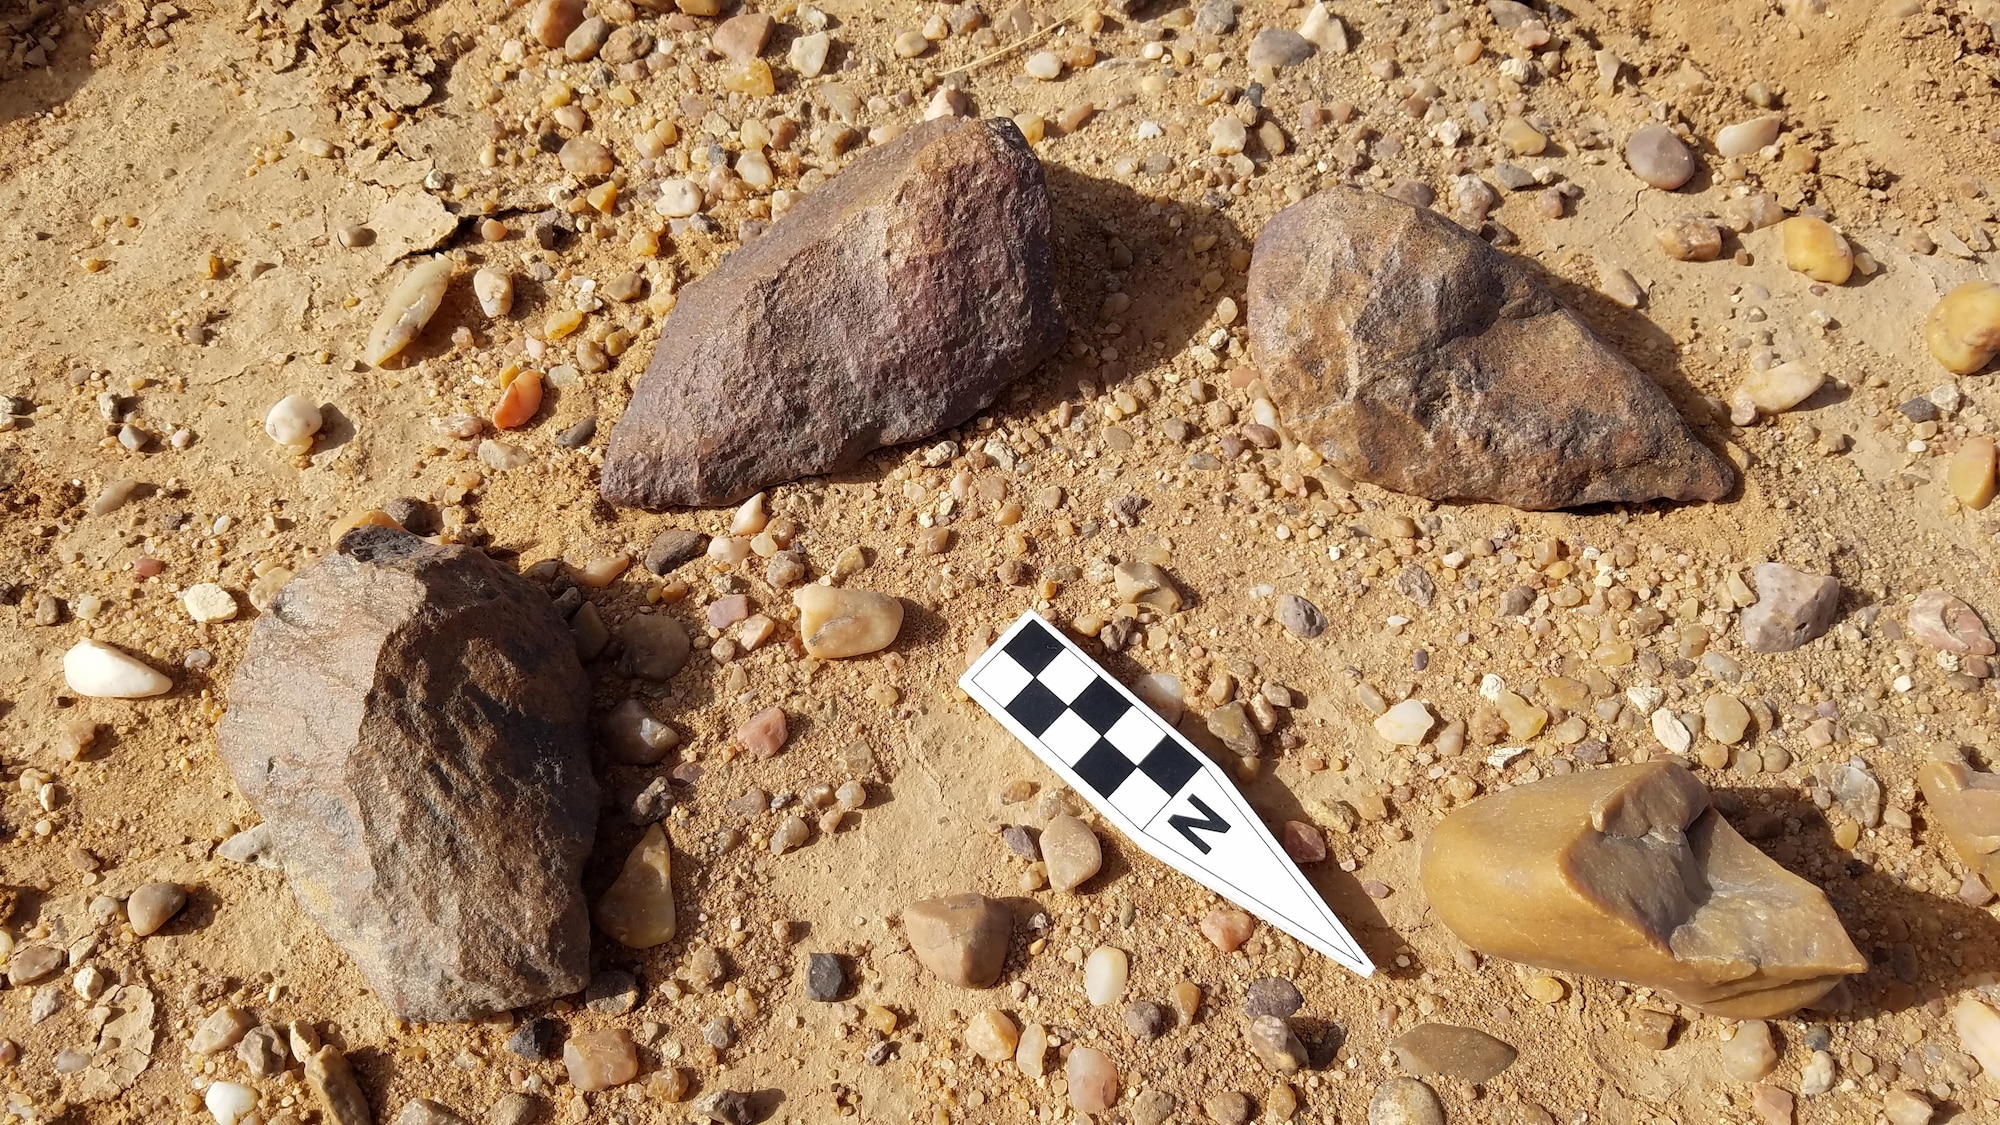 Acheulean tools, dating as far back as 1.76 million years ago in Africa and portions of the Asian continent recently discovered by USACE and USAFCEC archeologists. The two axes at the top of the photo are in their original location. 